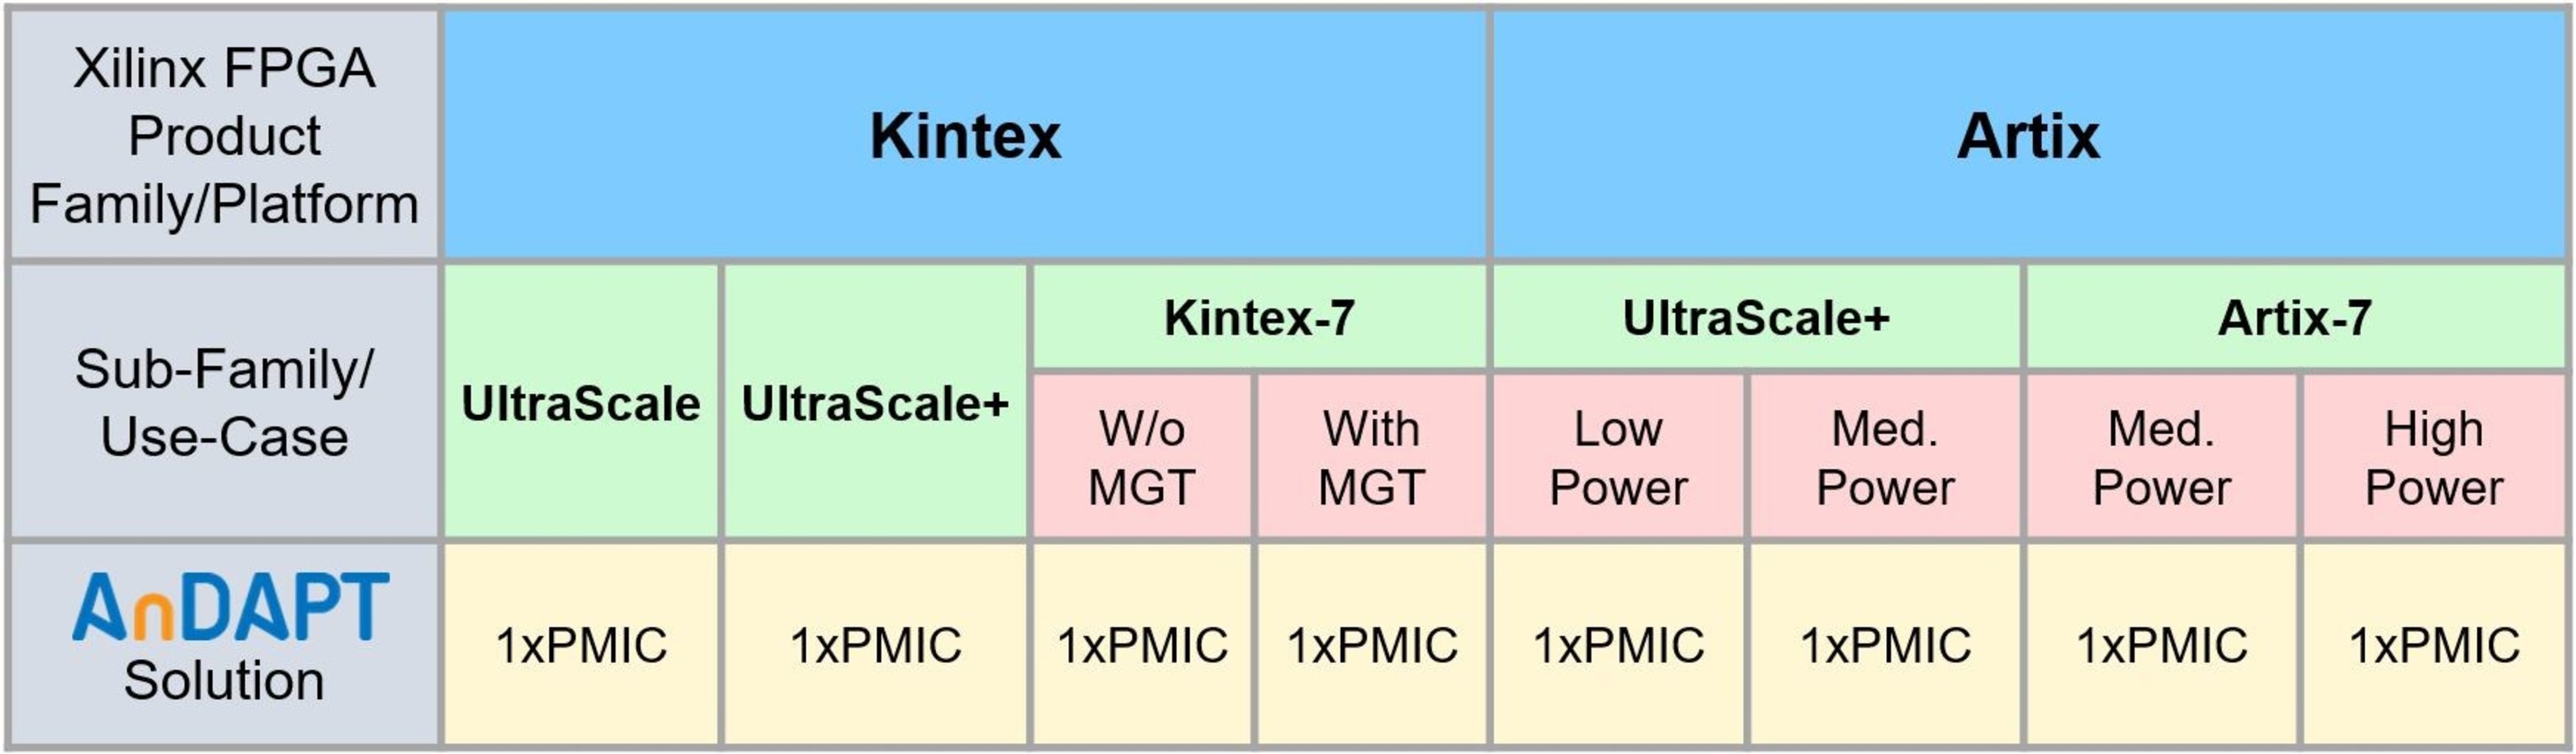 Andapt Introduces Power Solutions For Xilinx Artix And Kintex Fpga Soc Devices